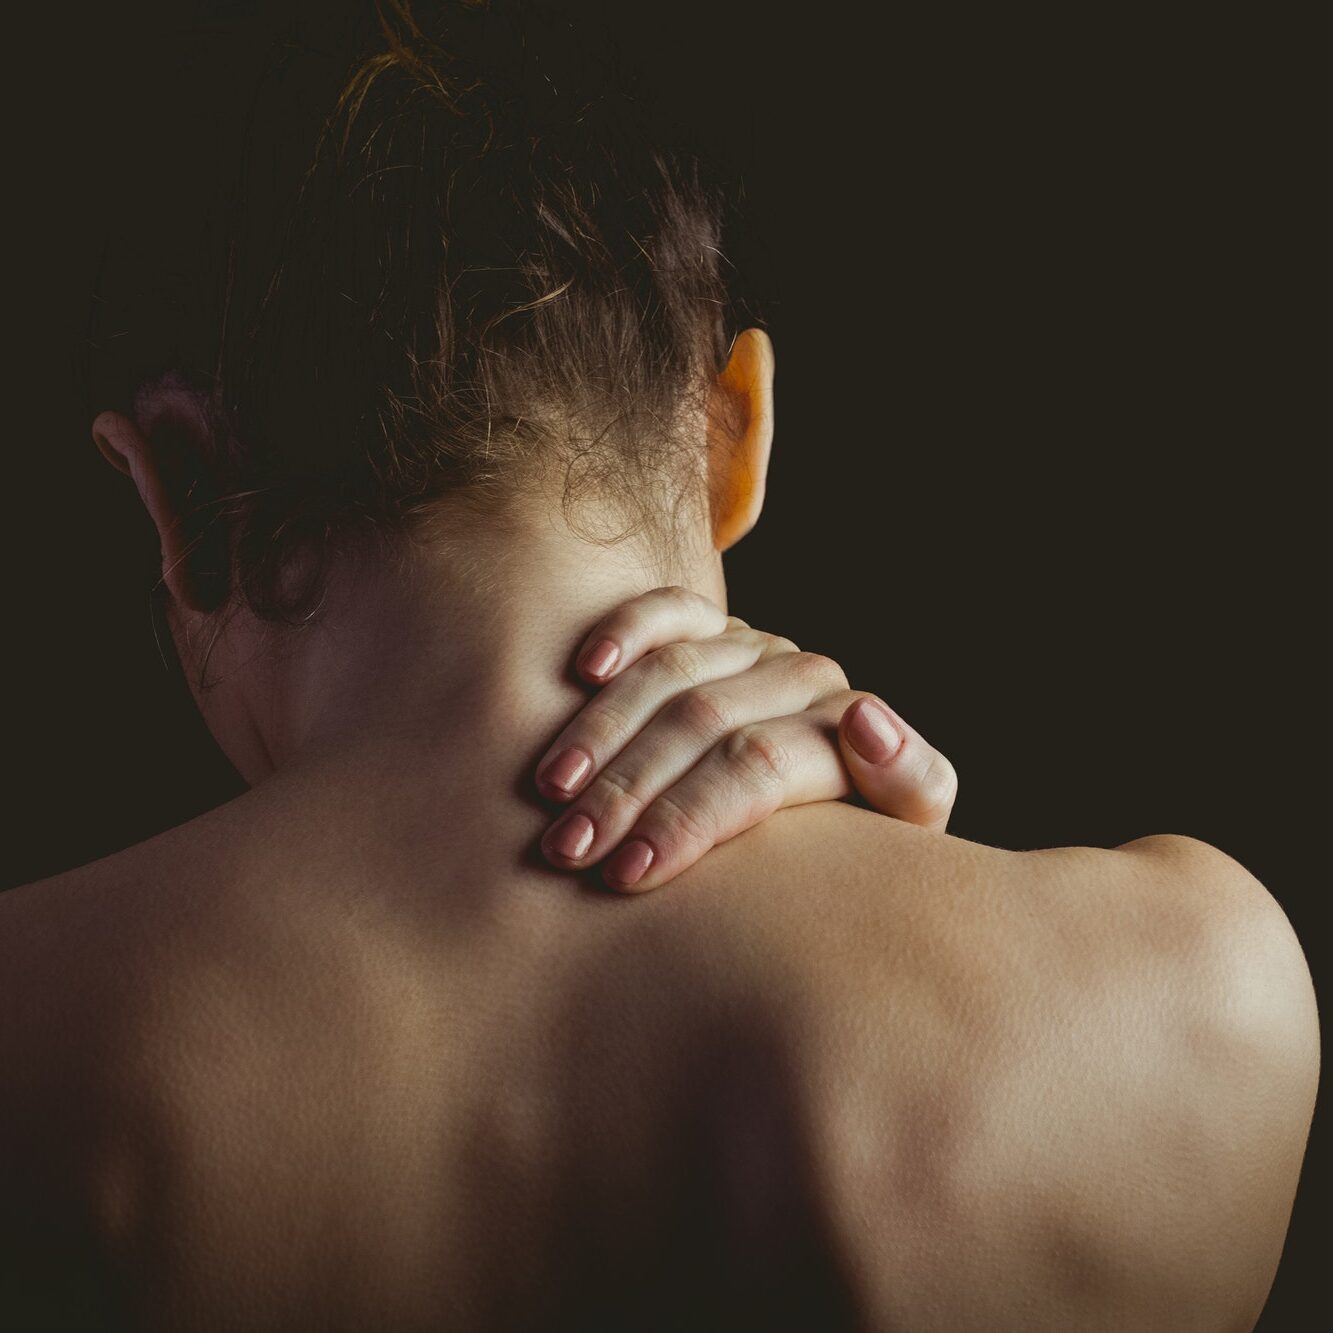 Woman with a neck injury on black background